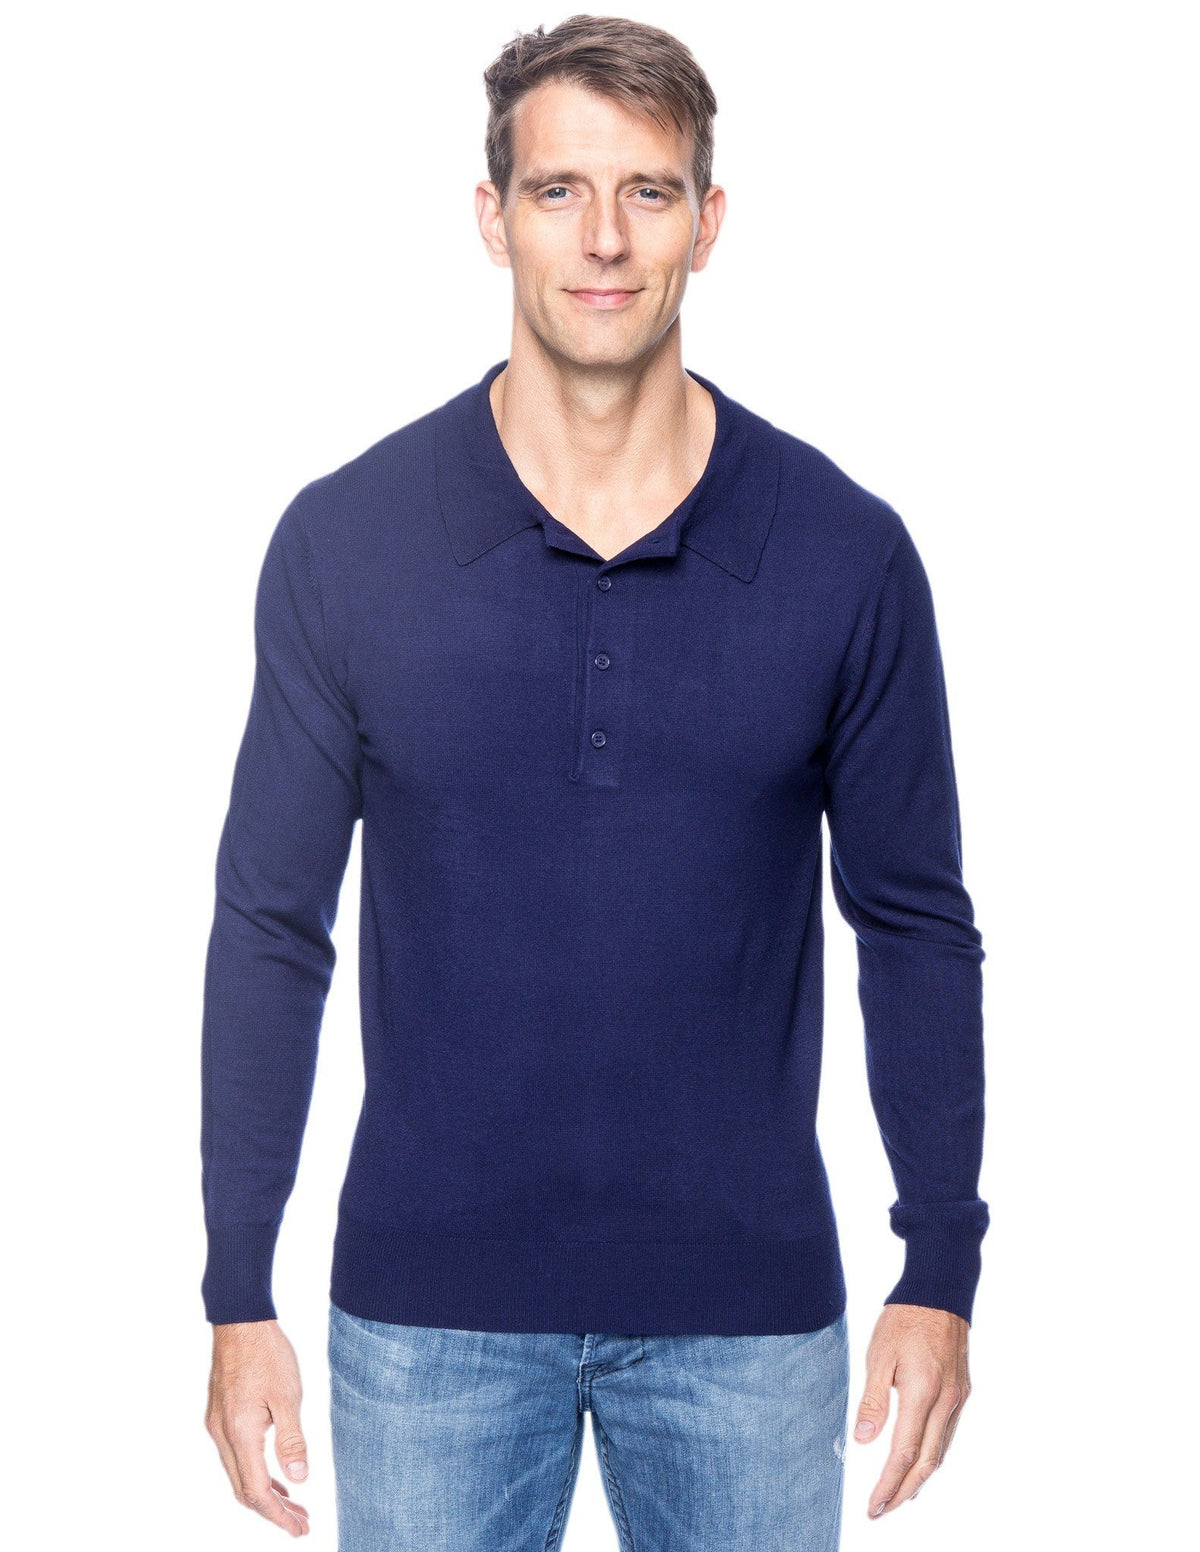 Men's Classic Knit Long Sleeve Polo Sweater - Navy